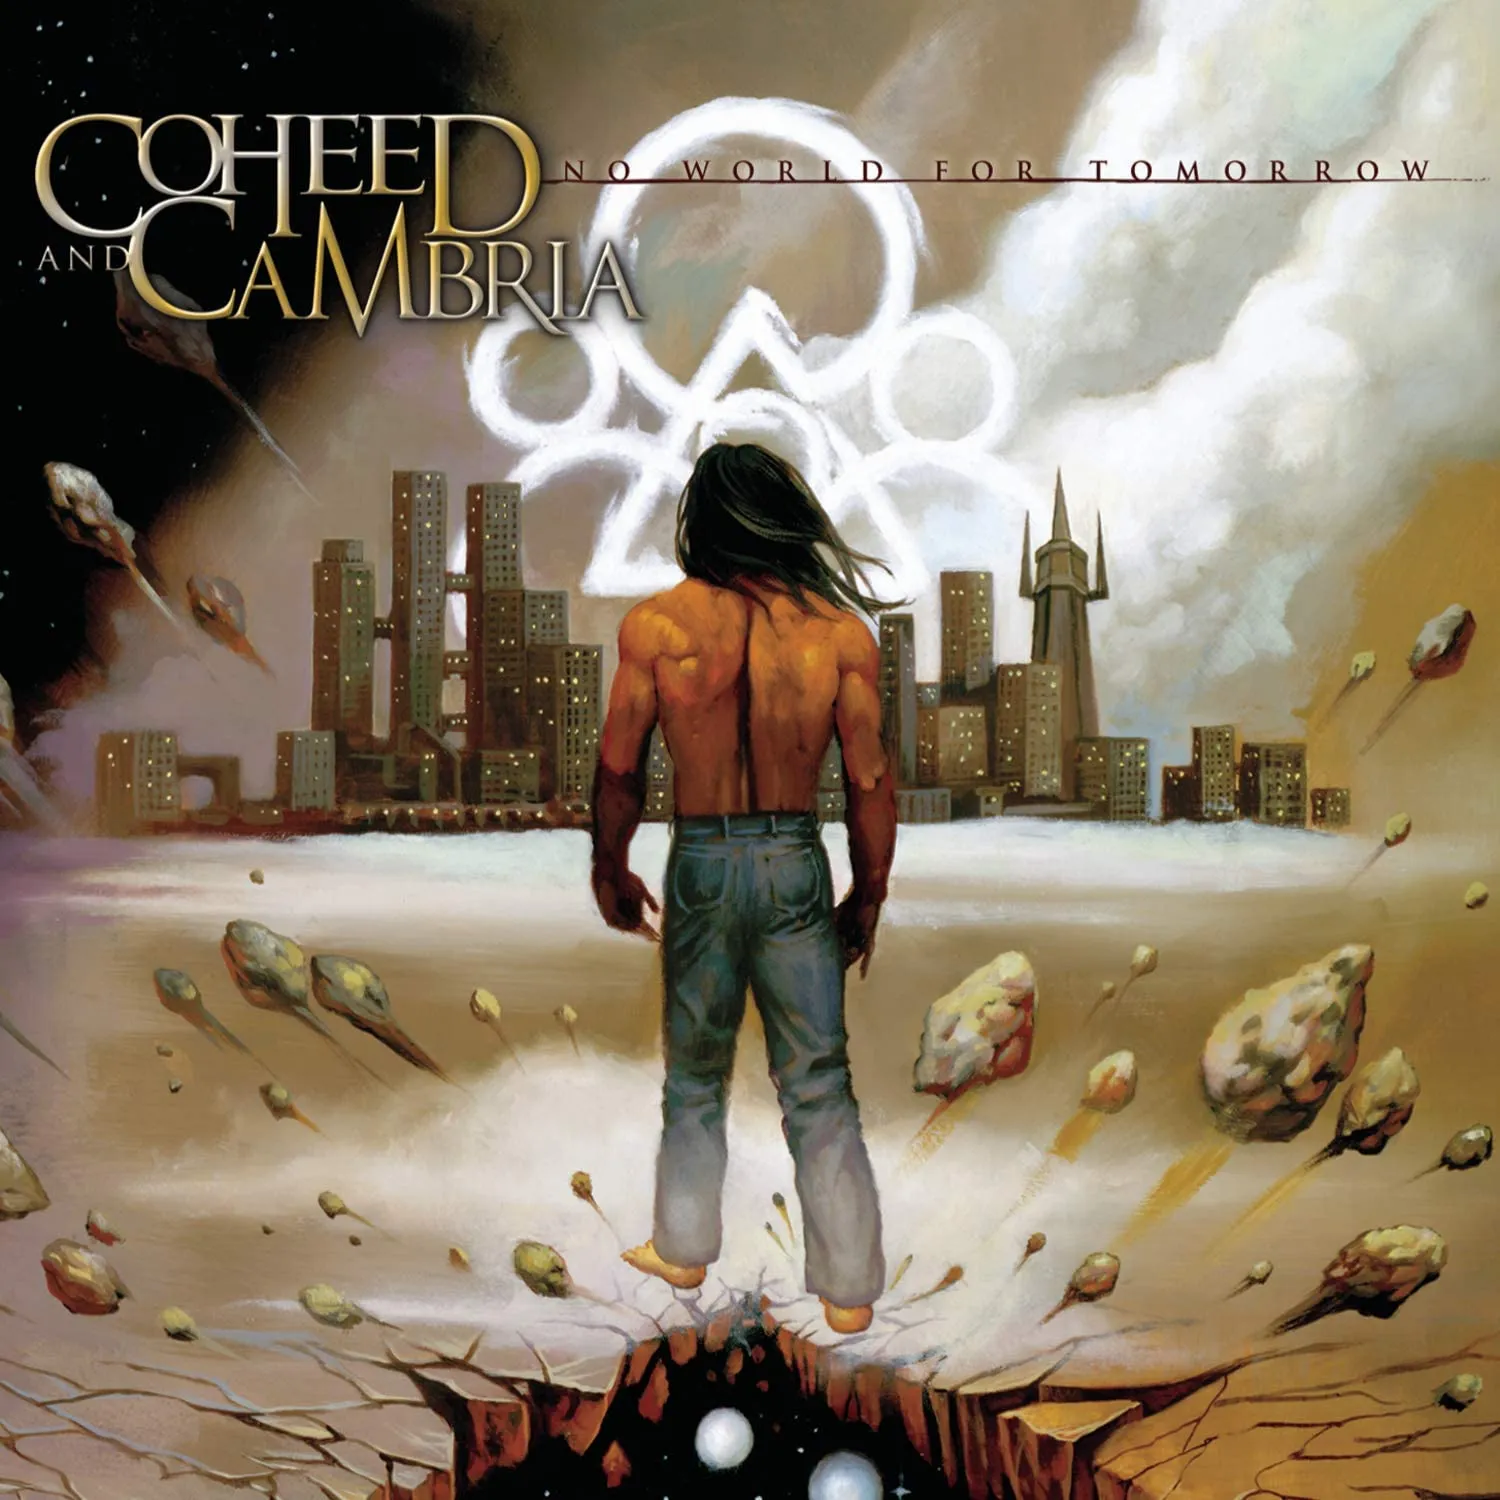 <strong>Coheed And Cambria - Good Apollo, I’m Burning Star IV, Volume Two: No World for Tomorrow</strong> (Vinyl LP - black)